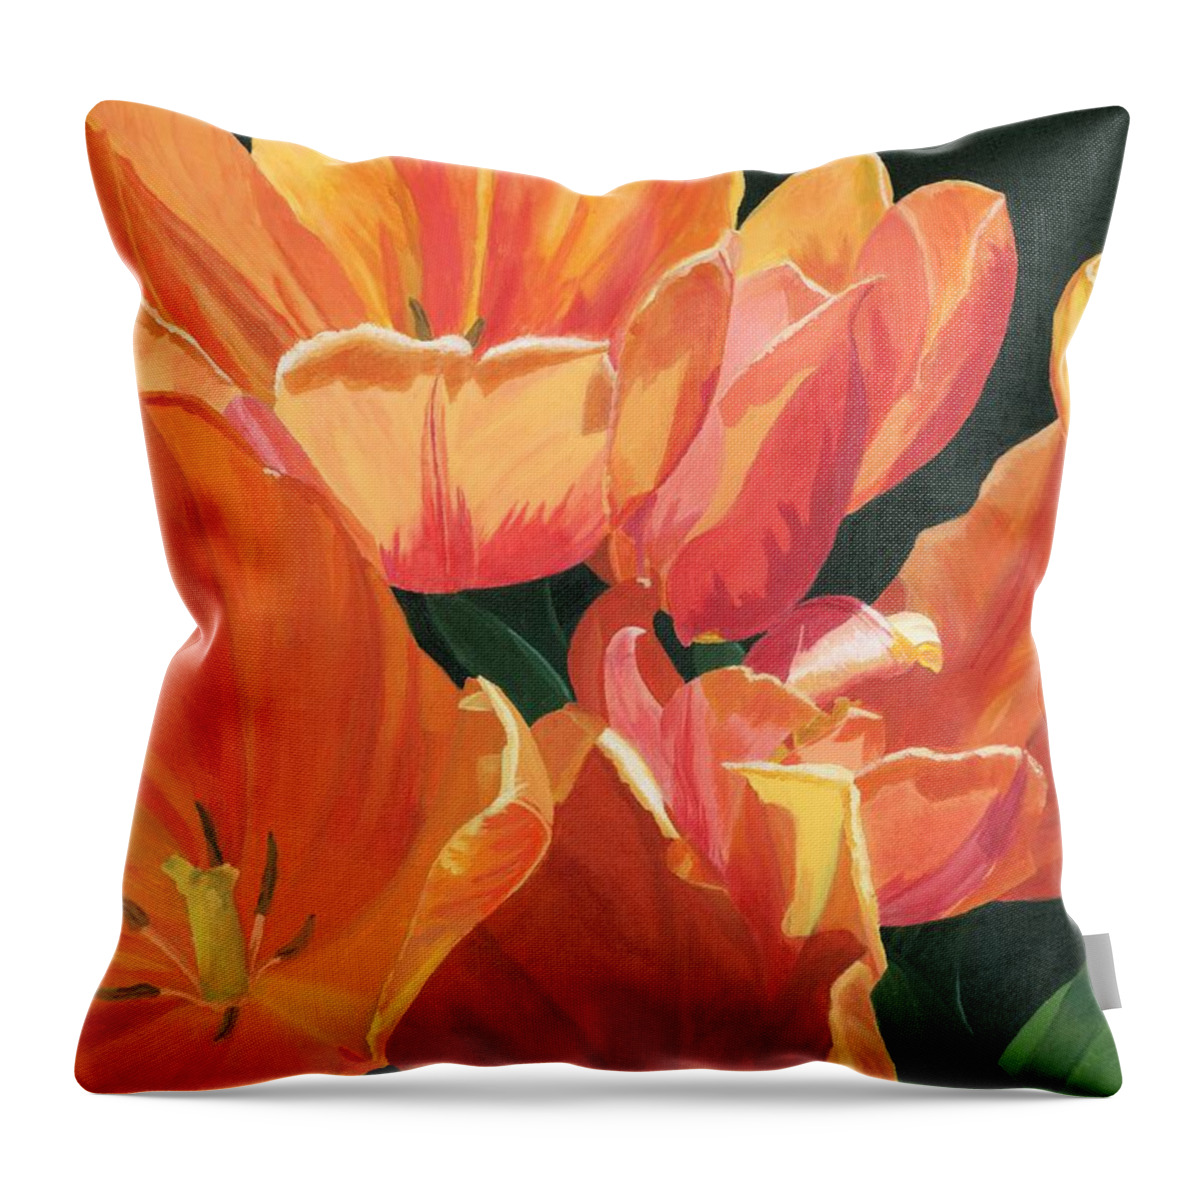 Tulips Throw Pillow featuring the painting Julie's Tulips by Lynne Reichhart